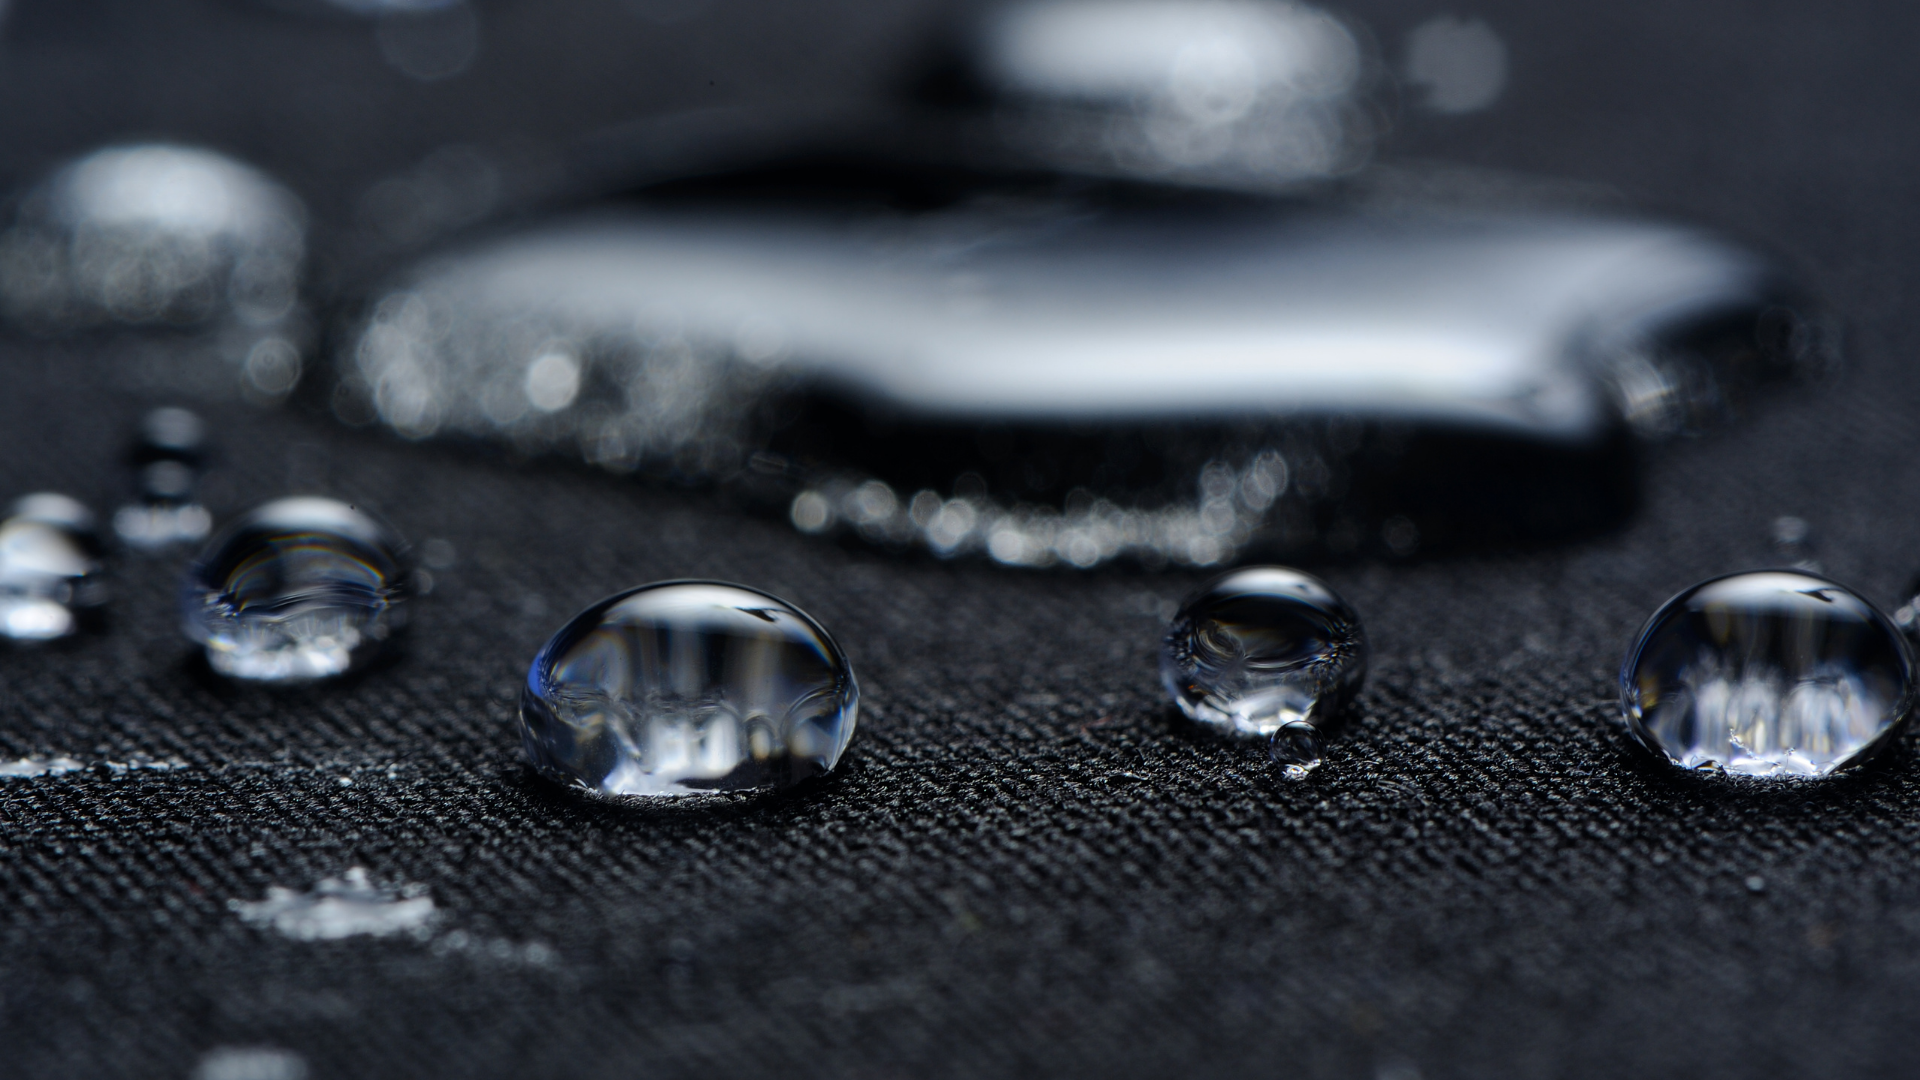 little droplets of water on a fabric